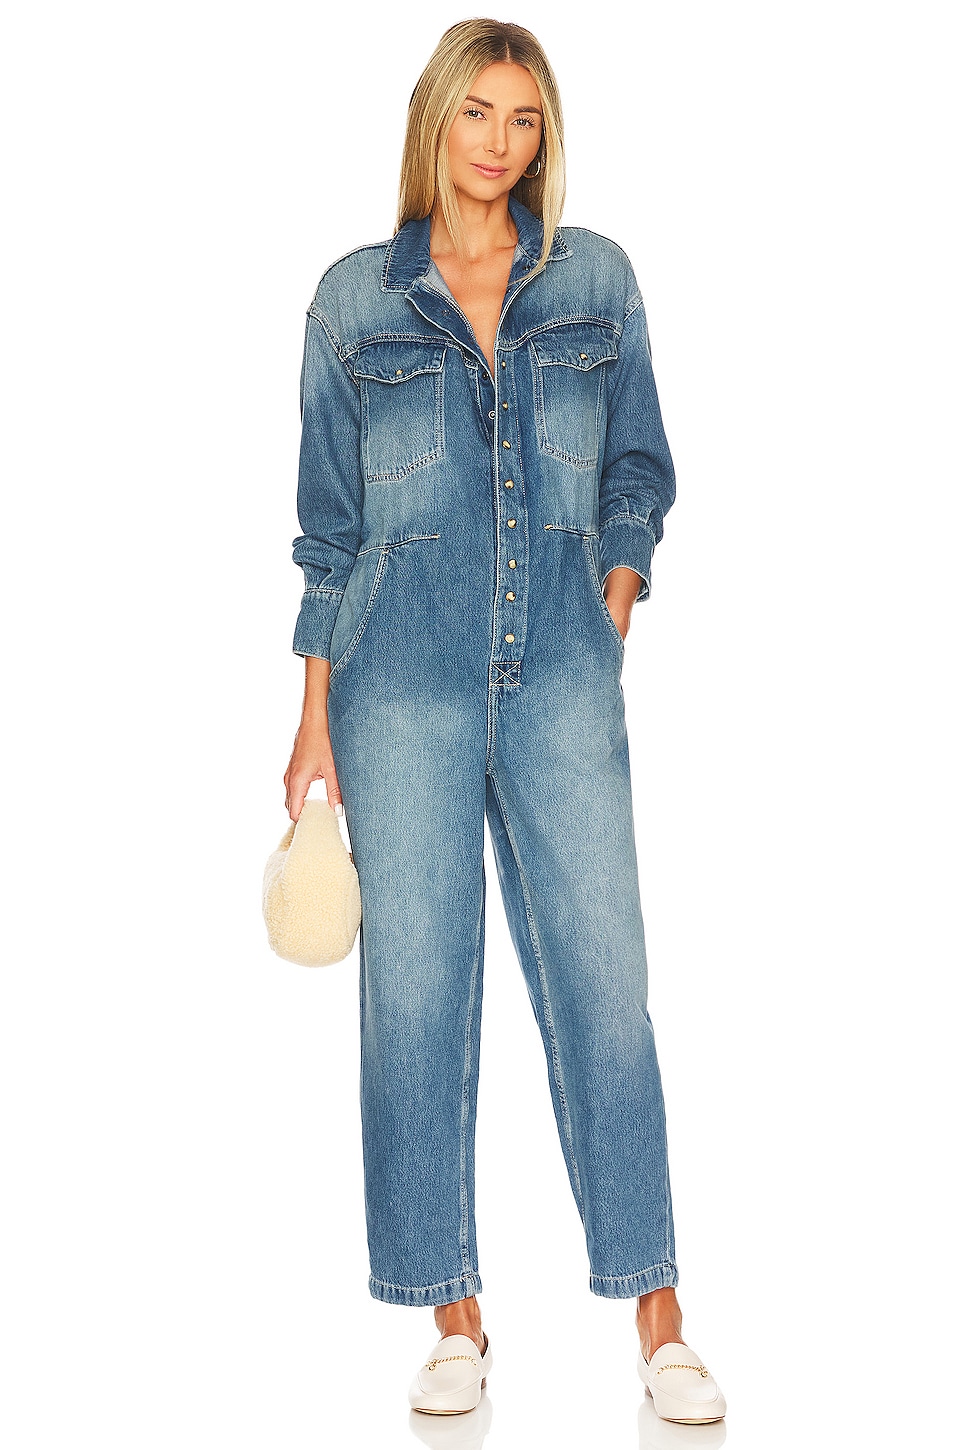 Free People x Care FP Townes Jumpsuit in High Noon | REVOLVE